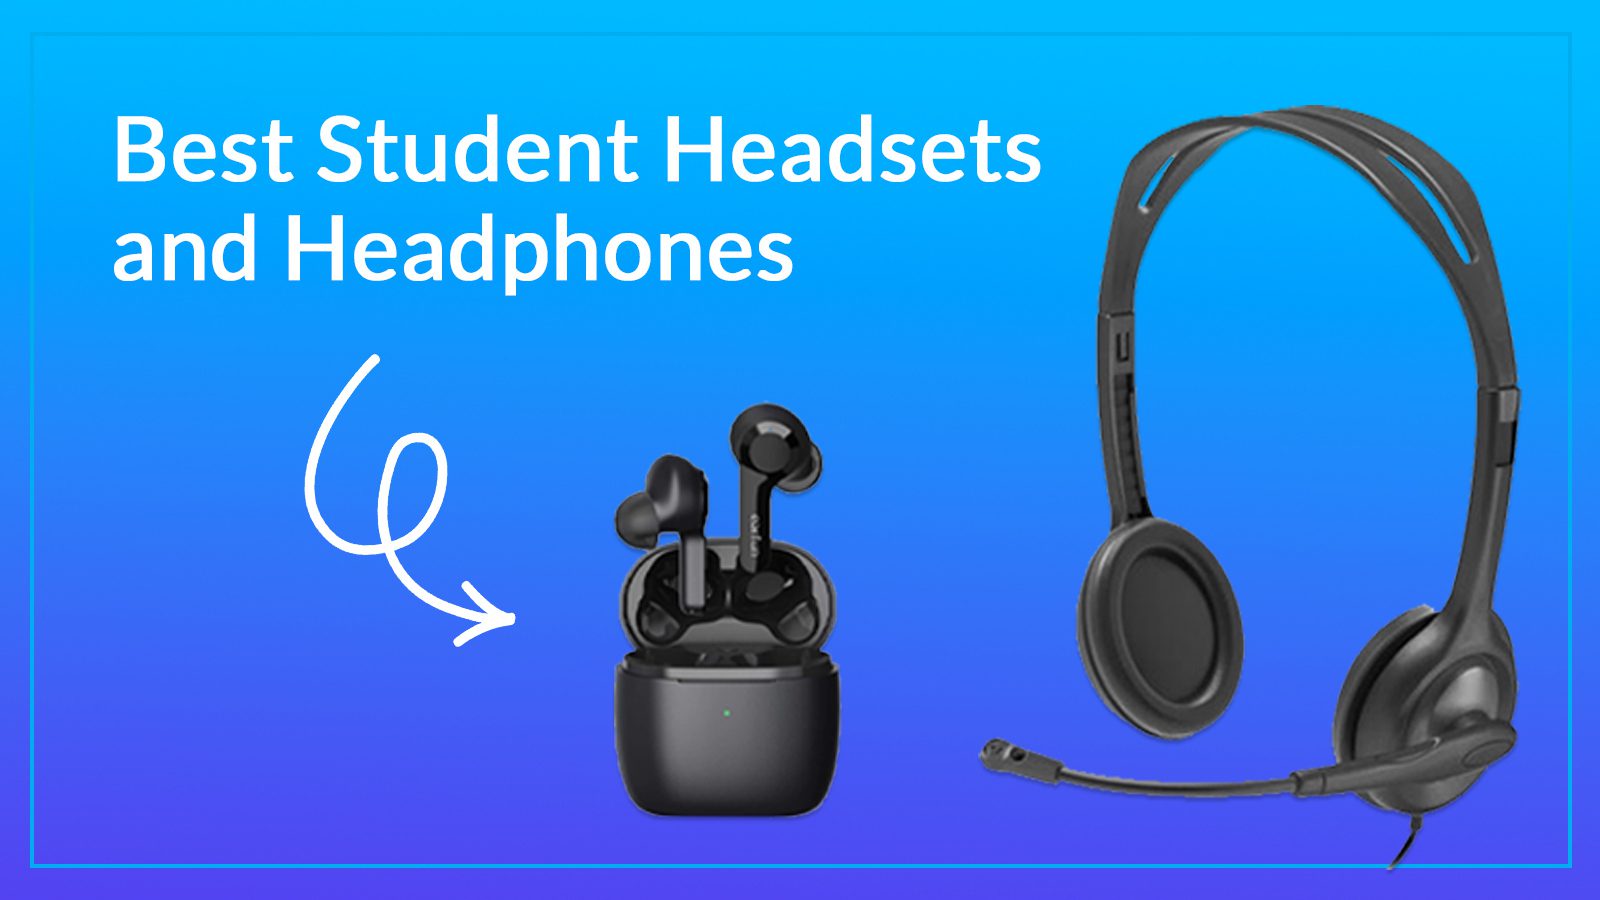 Best student headsets and headphones.